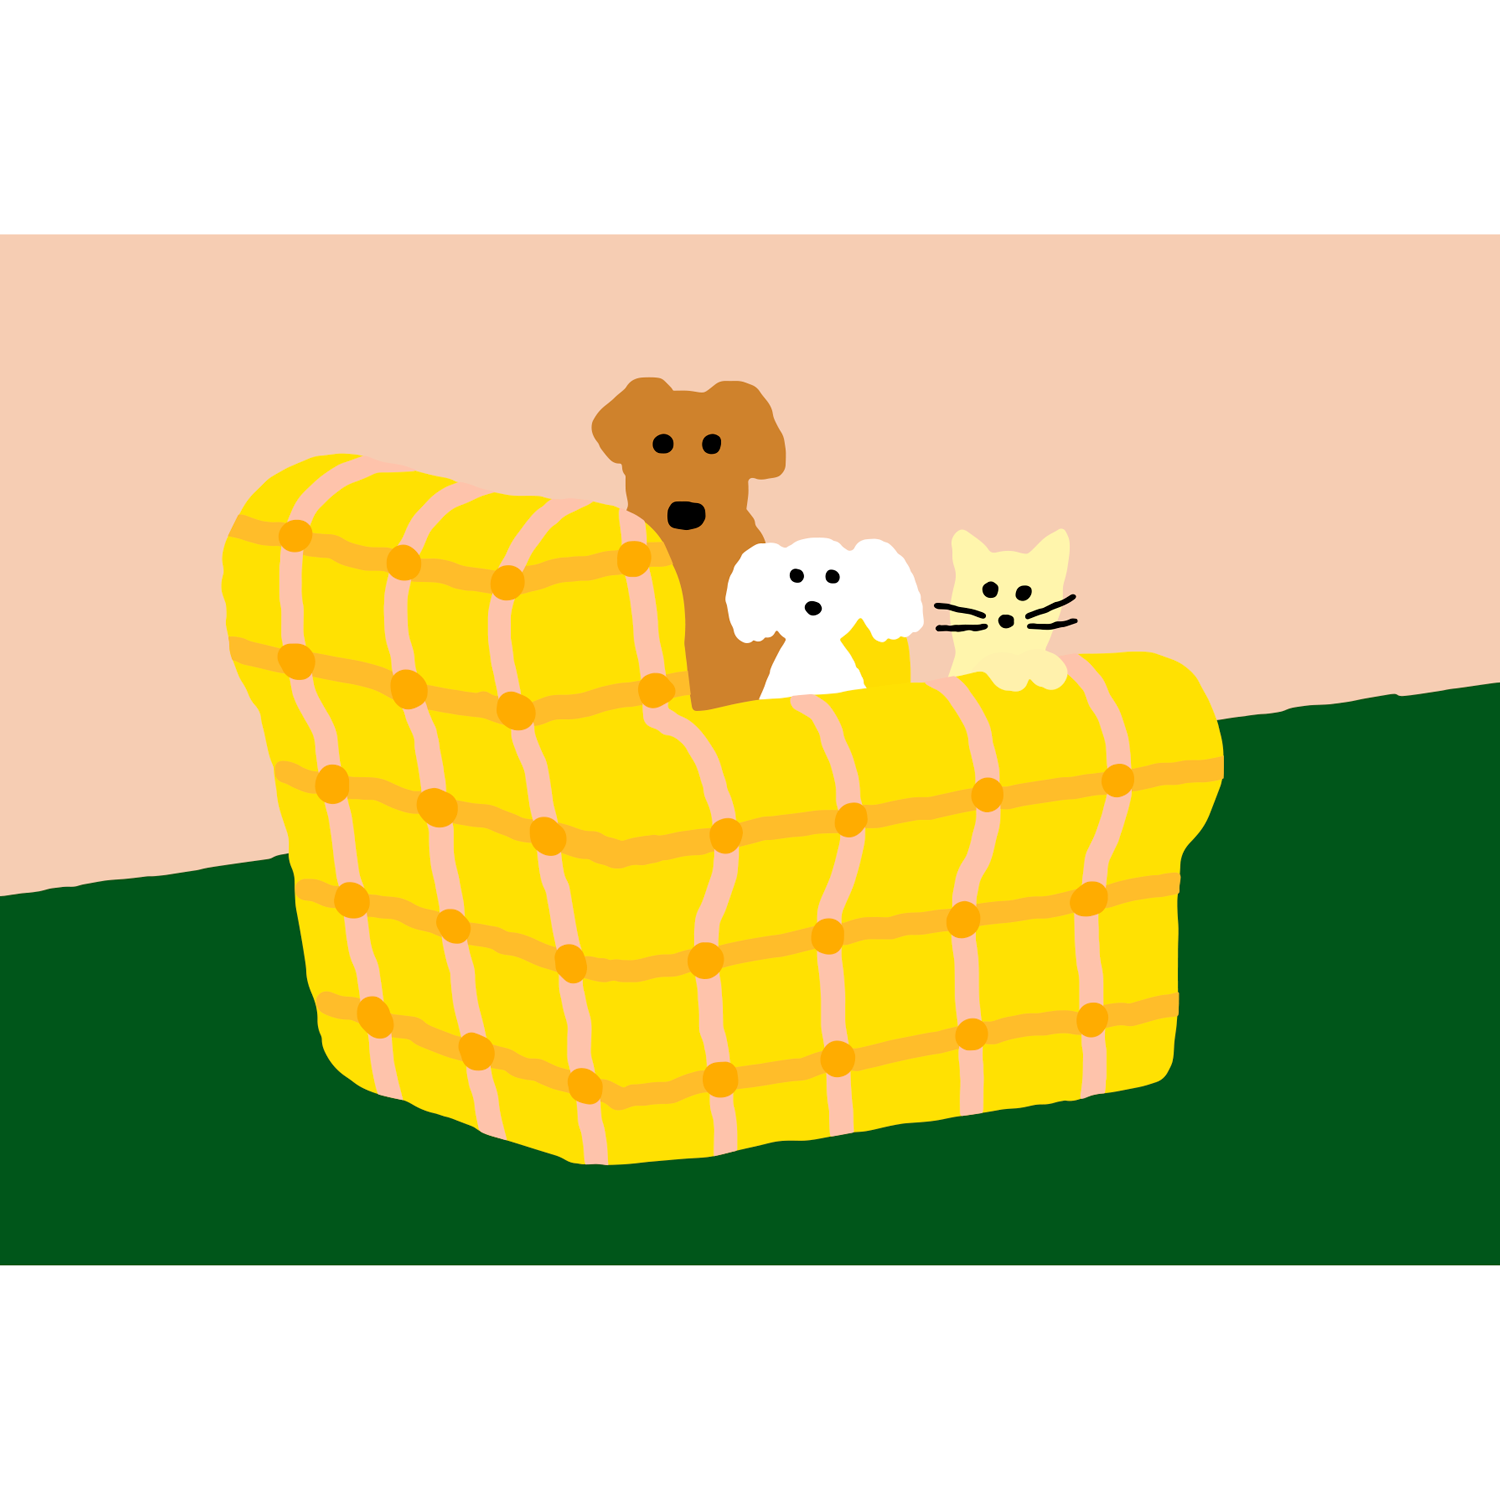 March, 2021Armchair Dogs &amp; Cat